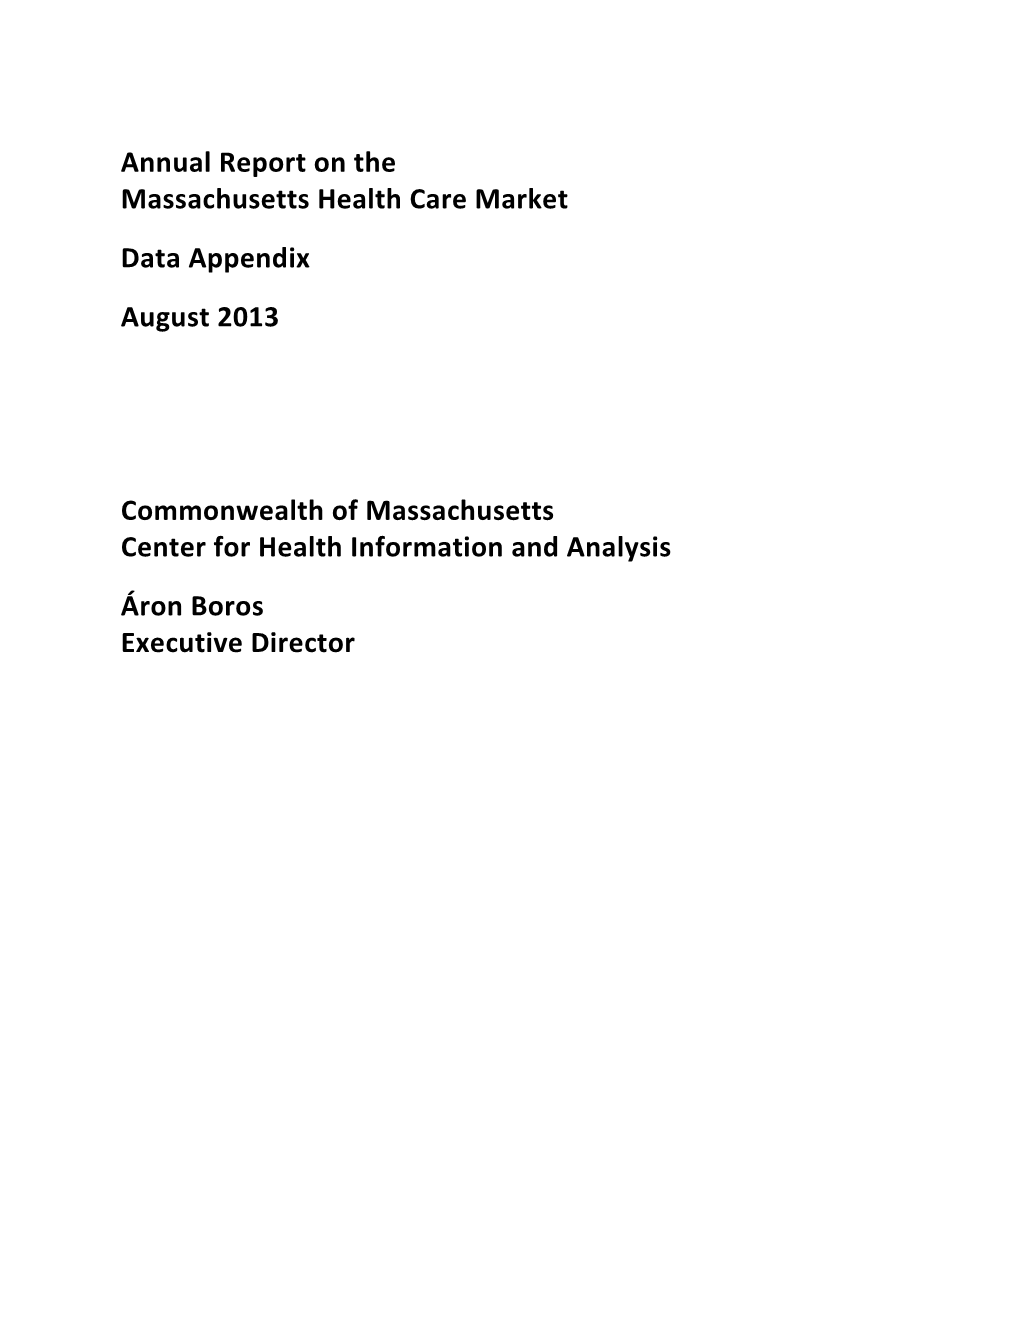 Annual Report on the Massachusetts Health Care Market - August 2013